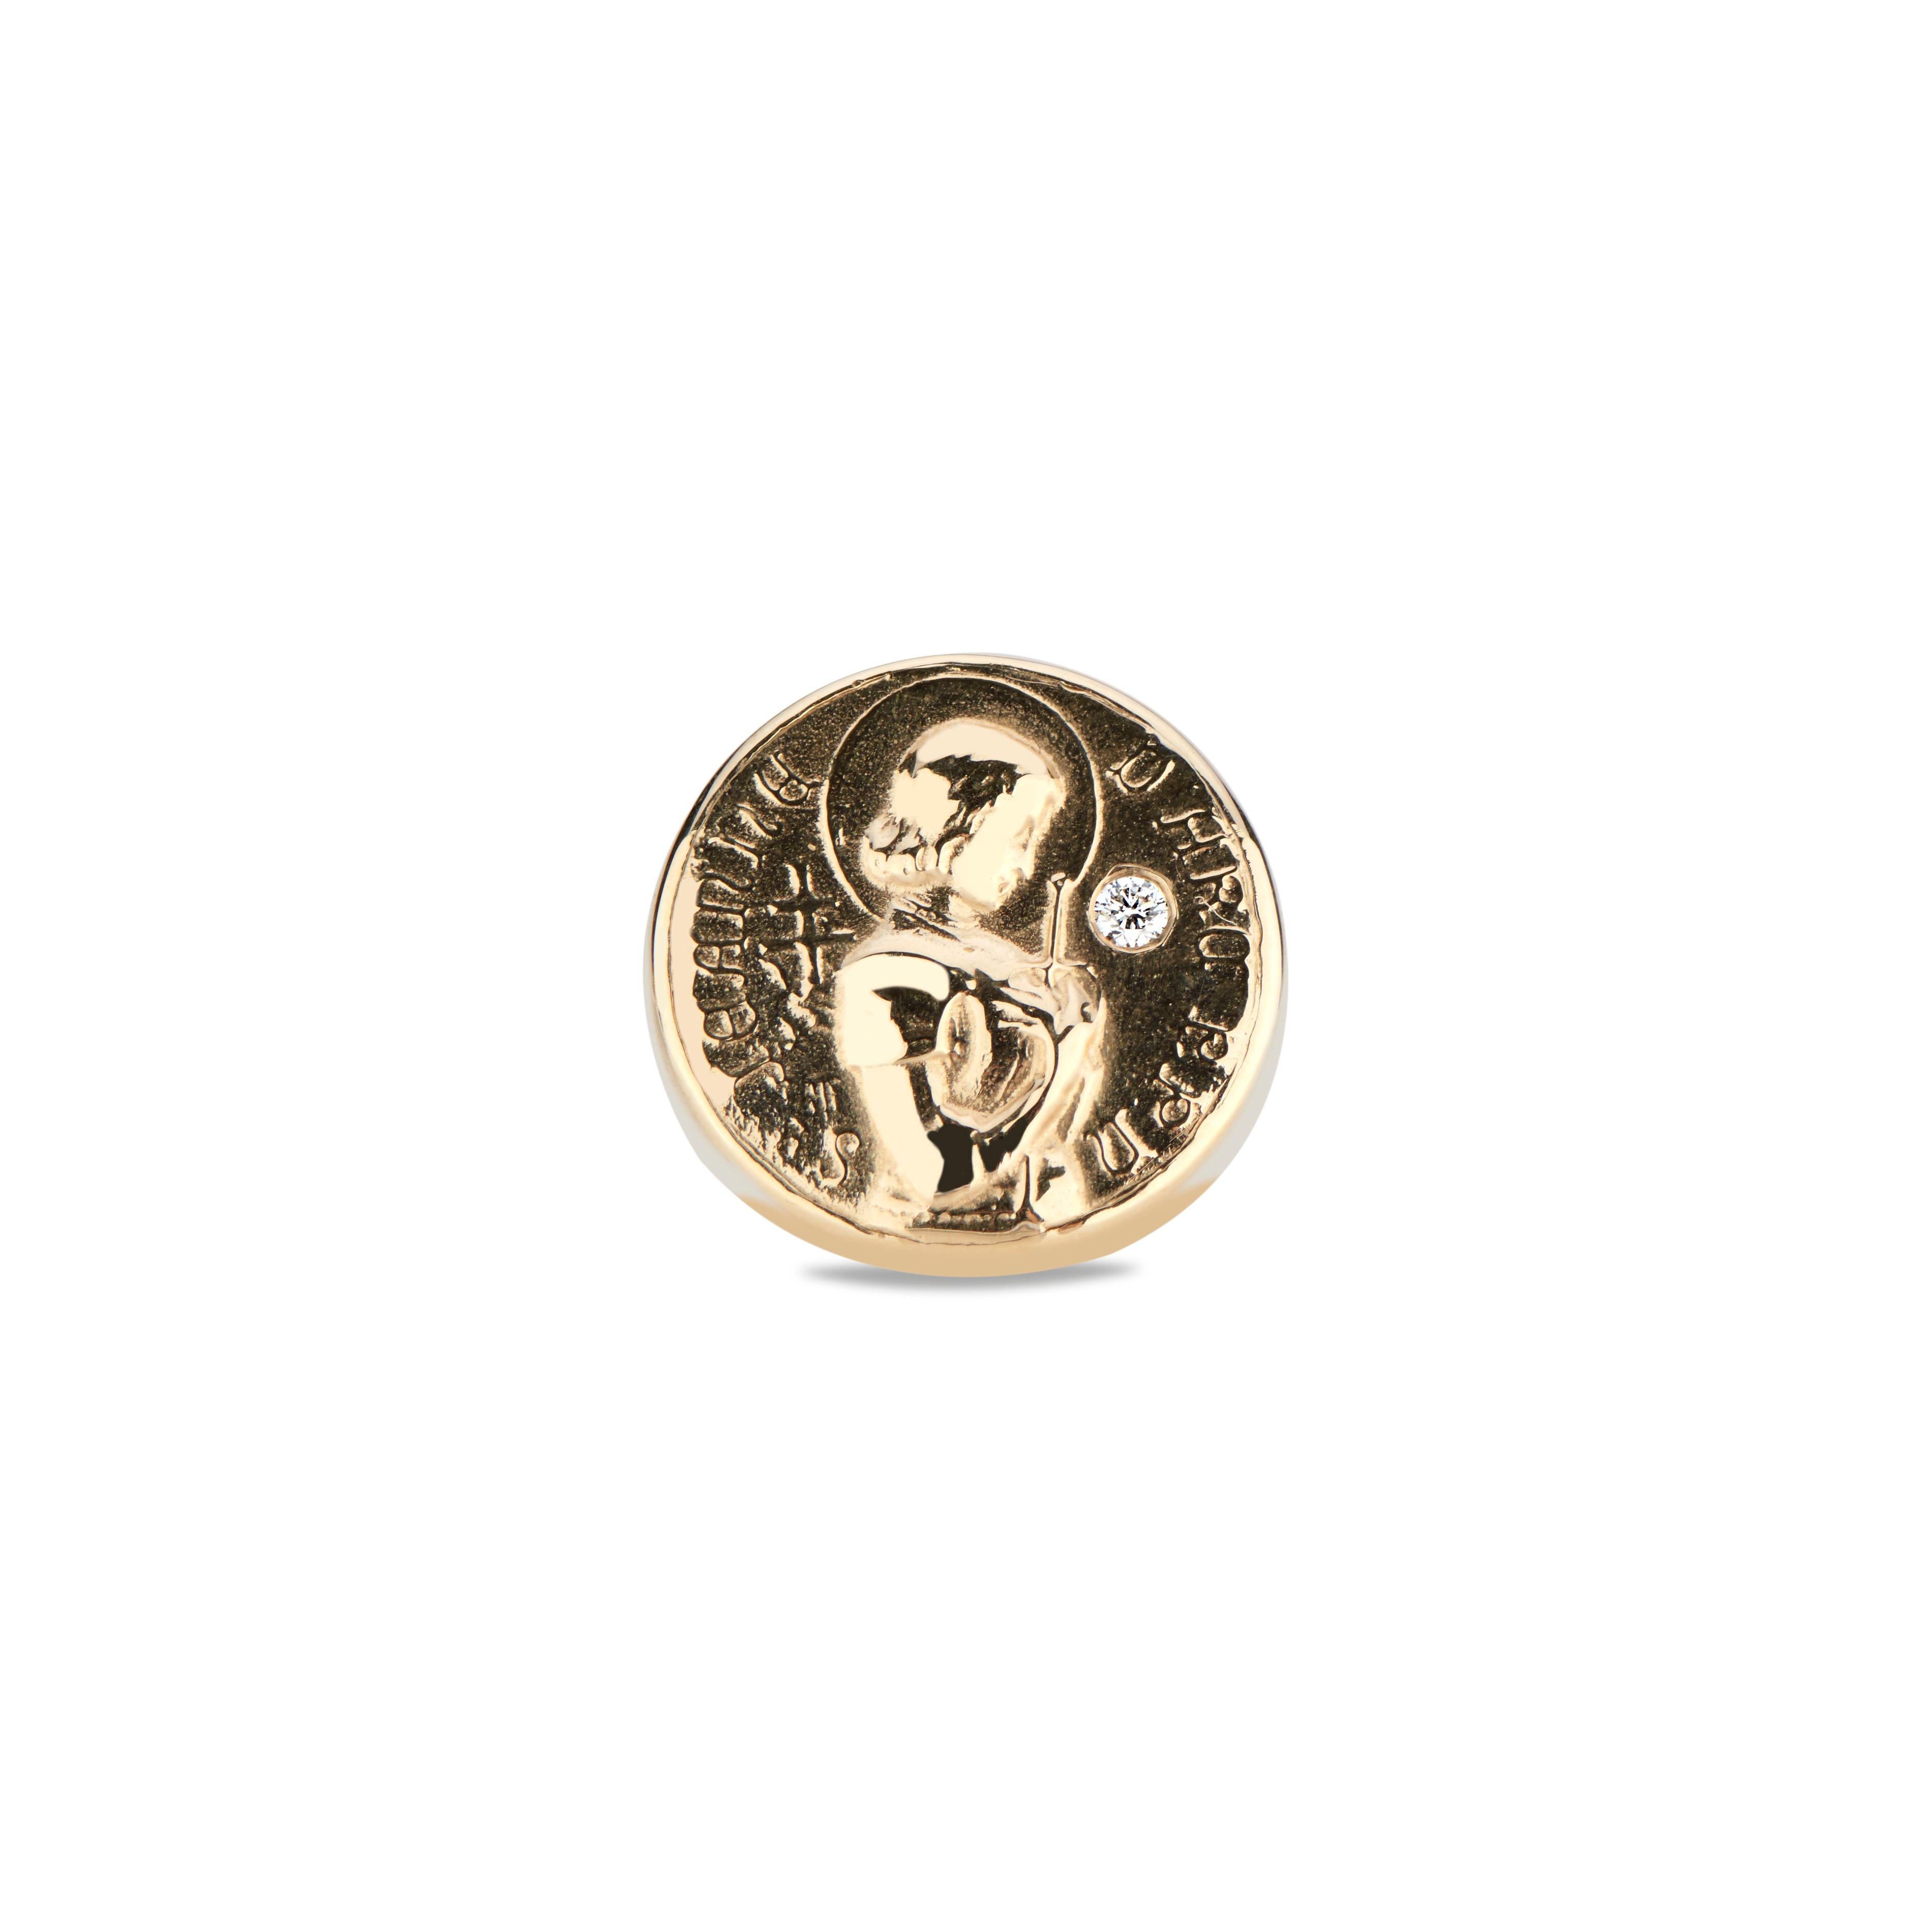 This 14k gold Saint Joan of Arc ring is created using one of DRU.'s most popular pieces, the Grace Medallion, which is cast from an antique medal of Saint Joan of Arc.  Saint Joan is the Patron Saint of France and an icon of bravery and